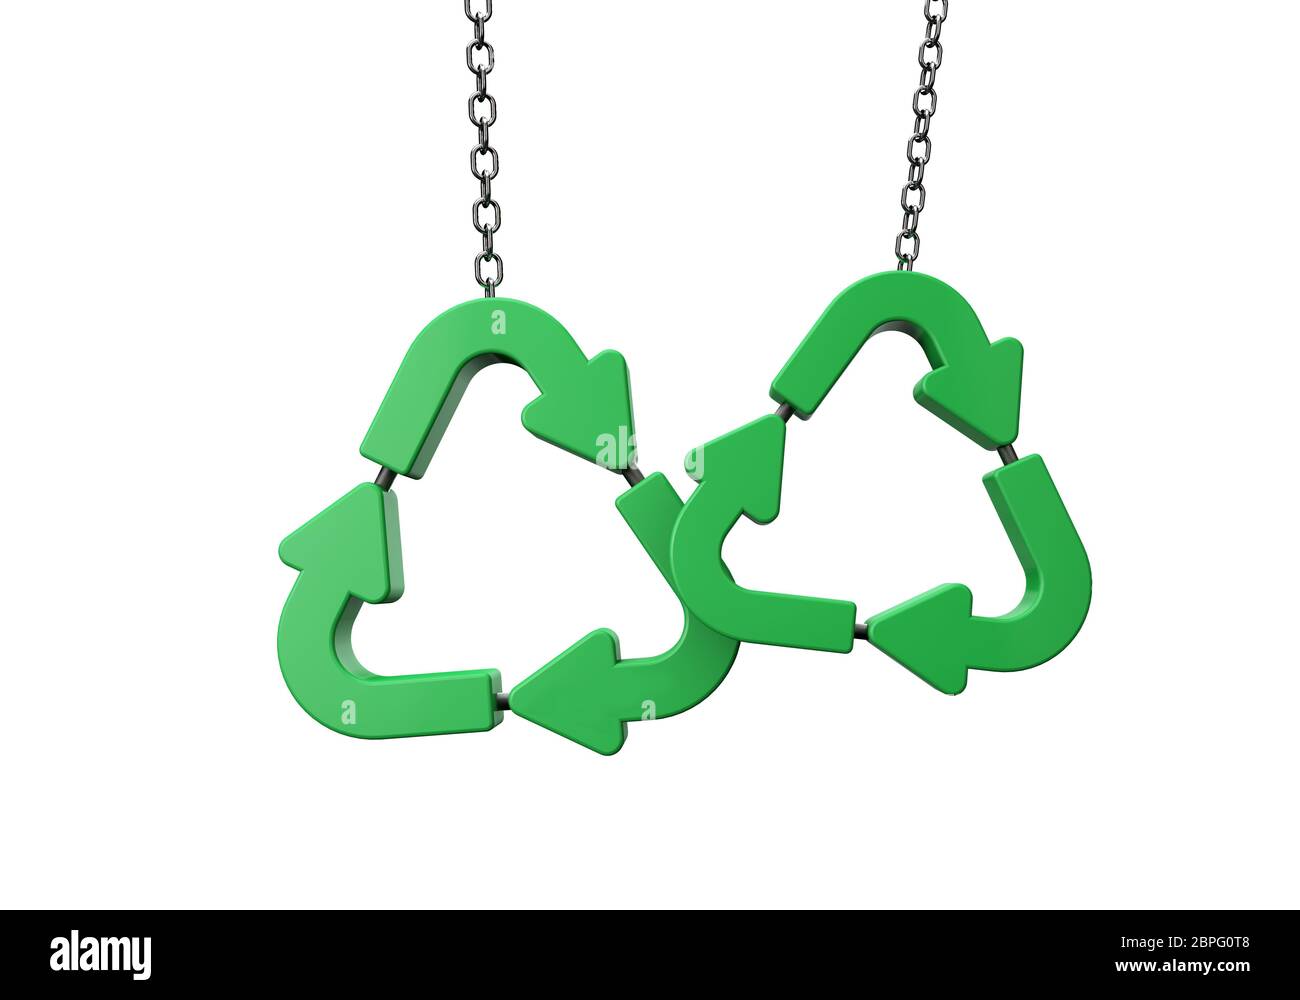 Green recycling symbol hanging from a chain. 3D Rendering Stock Photo